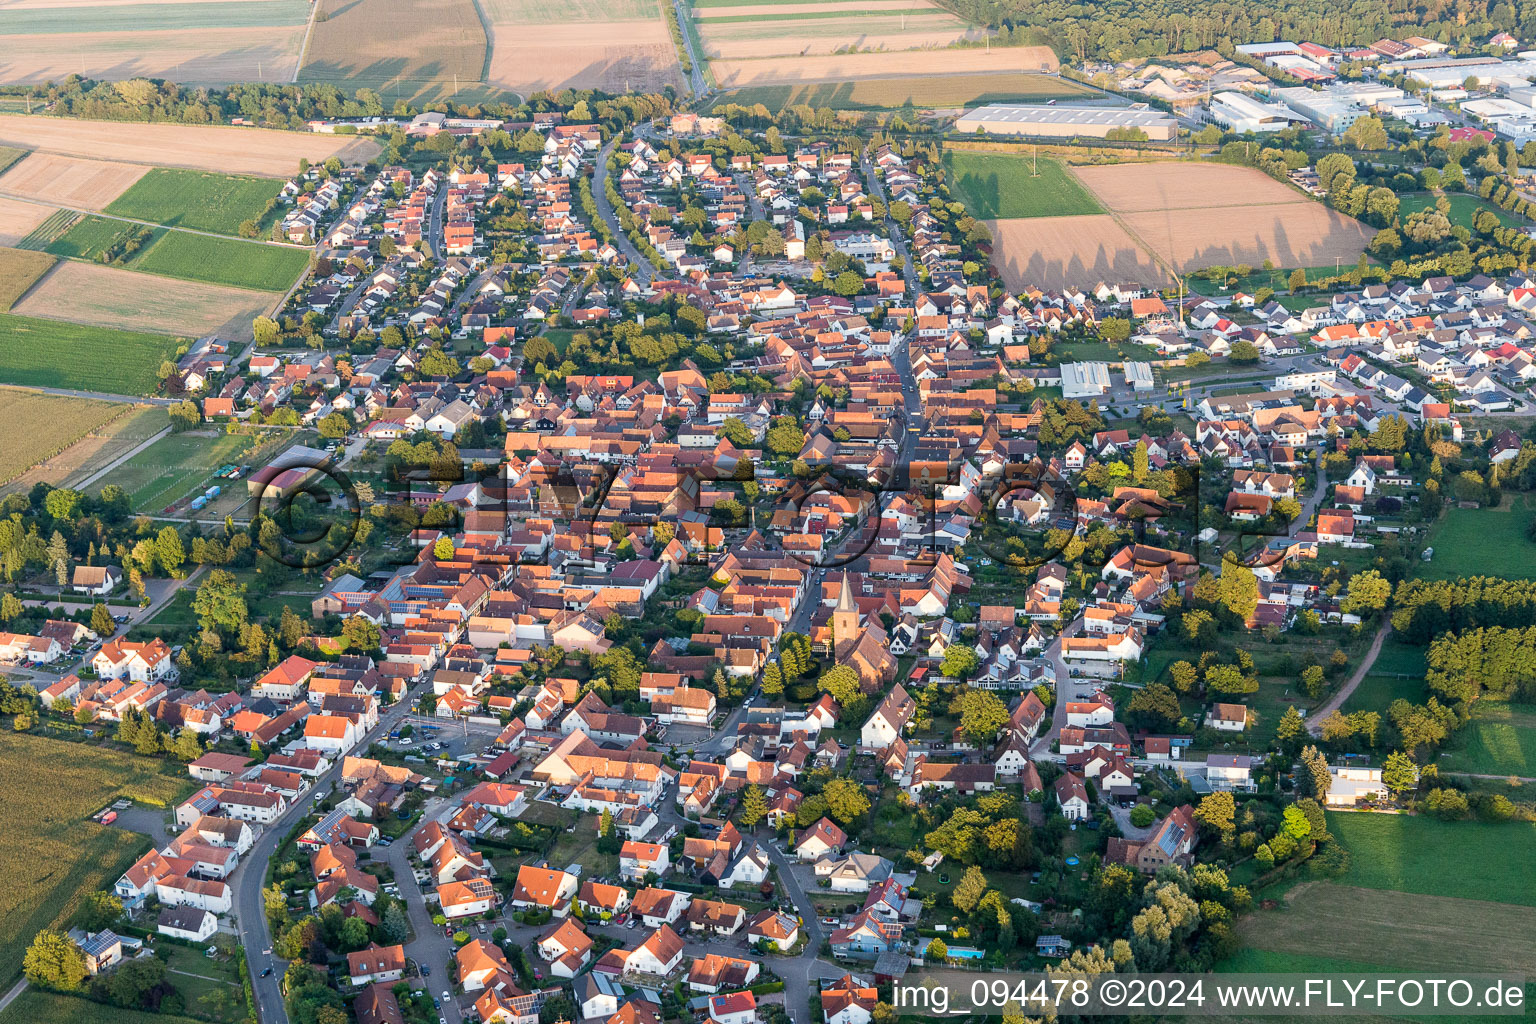 Aerial photograpy of Village - view on the edge of agricultural fields and farmland in Rohrbach in the state Rhineland-Palatinate, Germany